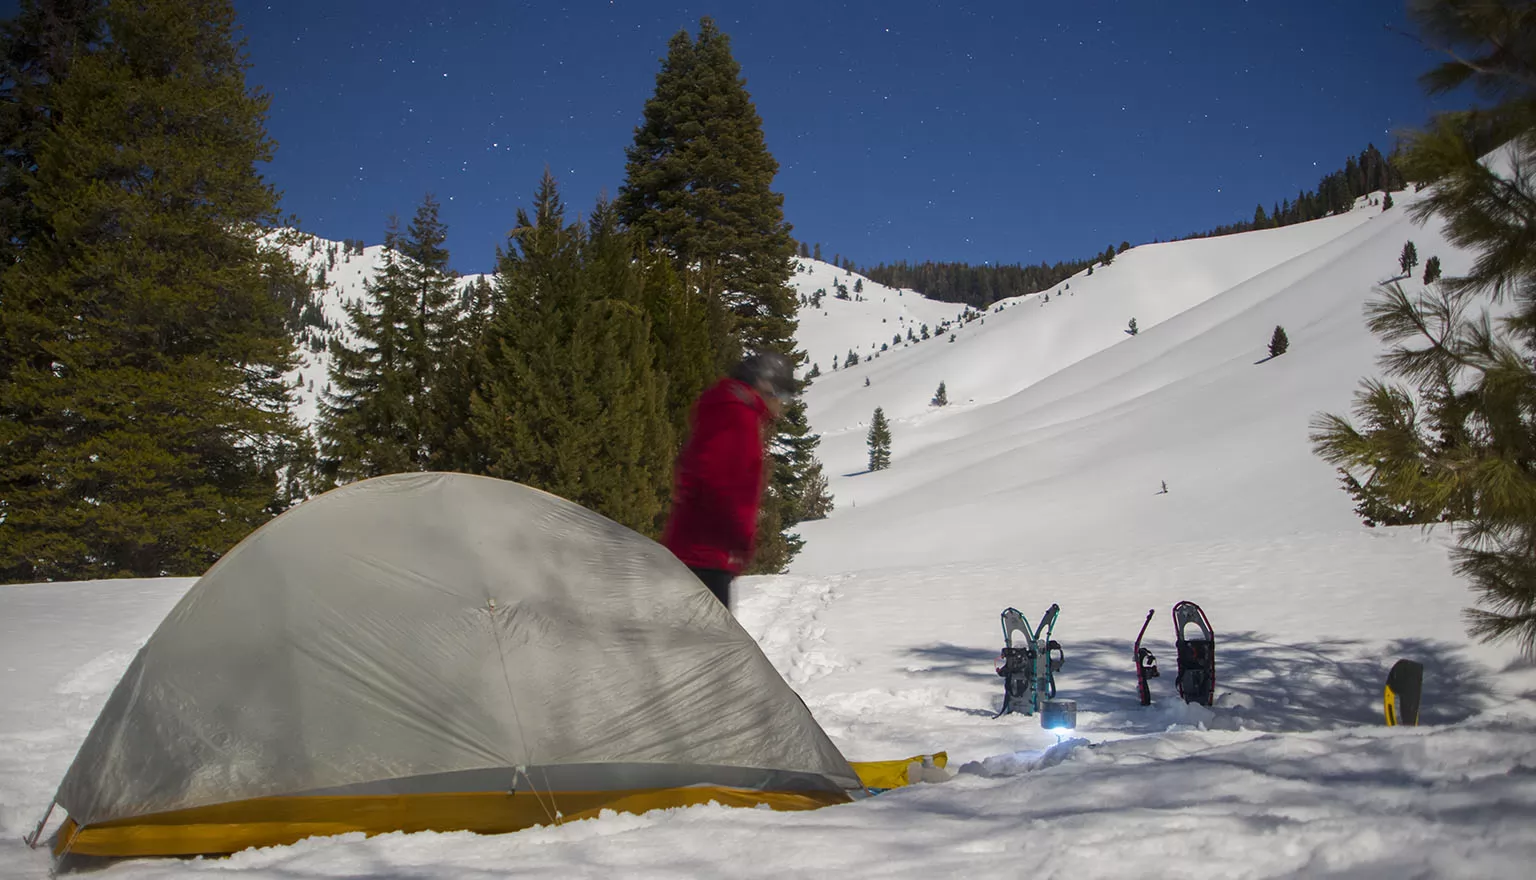 Our camp by moonlight. The Sawtooth Pass Trailhead right behind us.